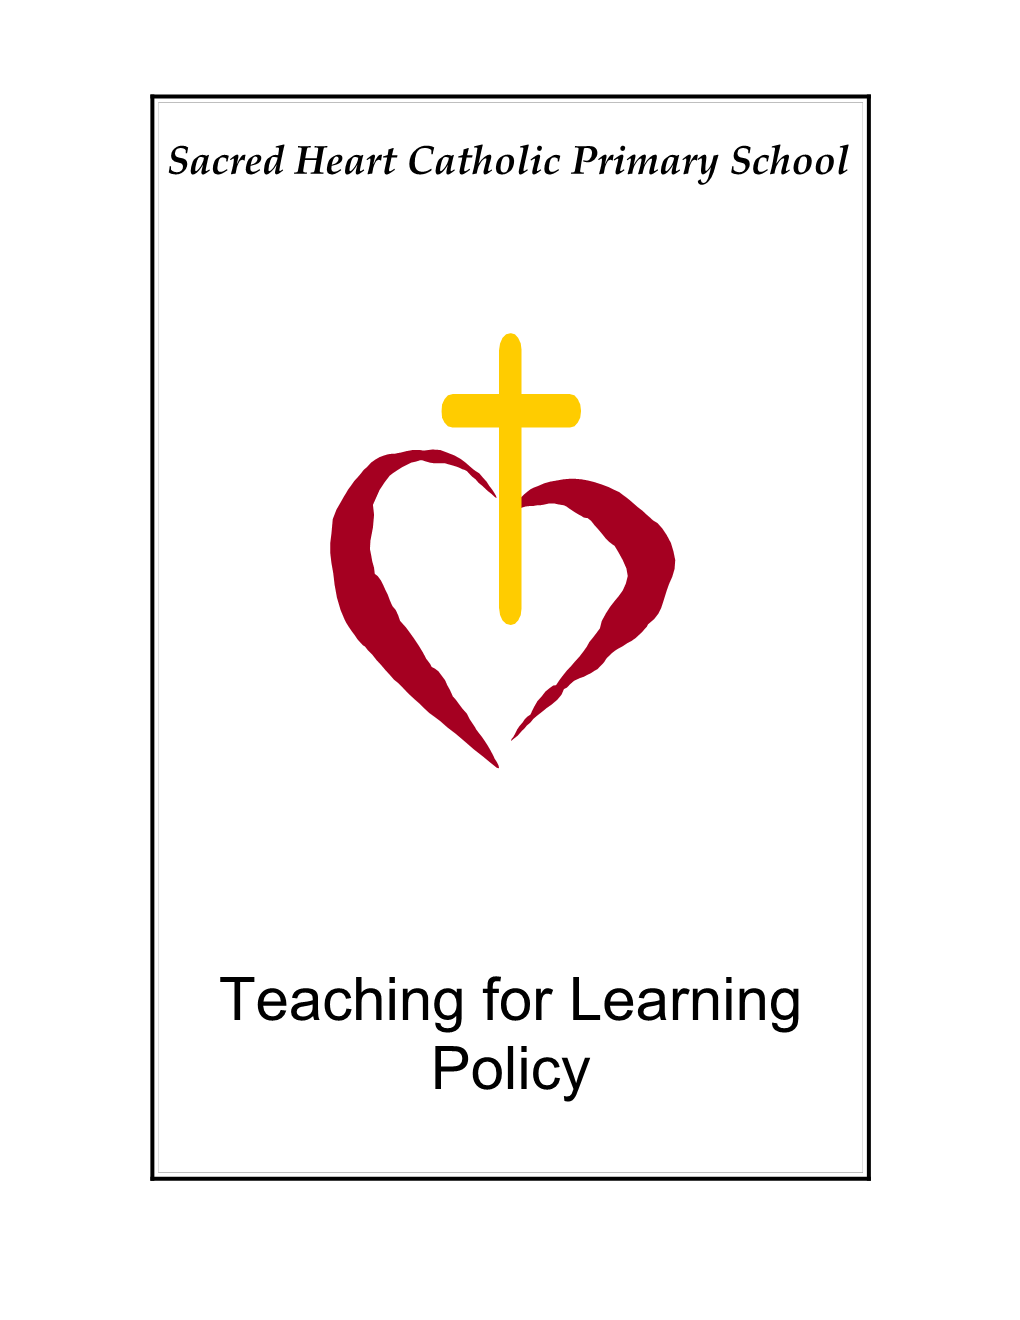 Teaching for Learning Policy